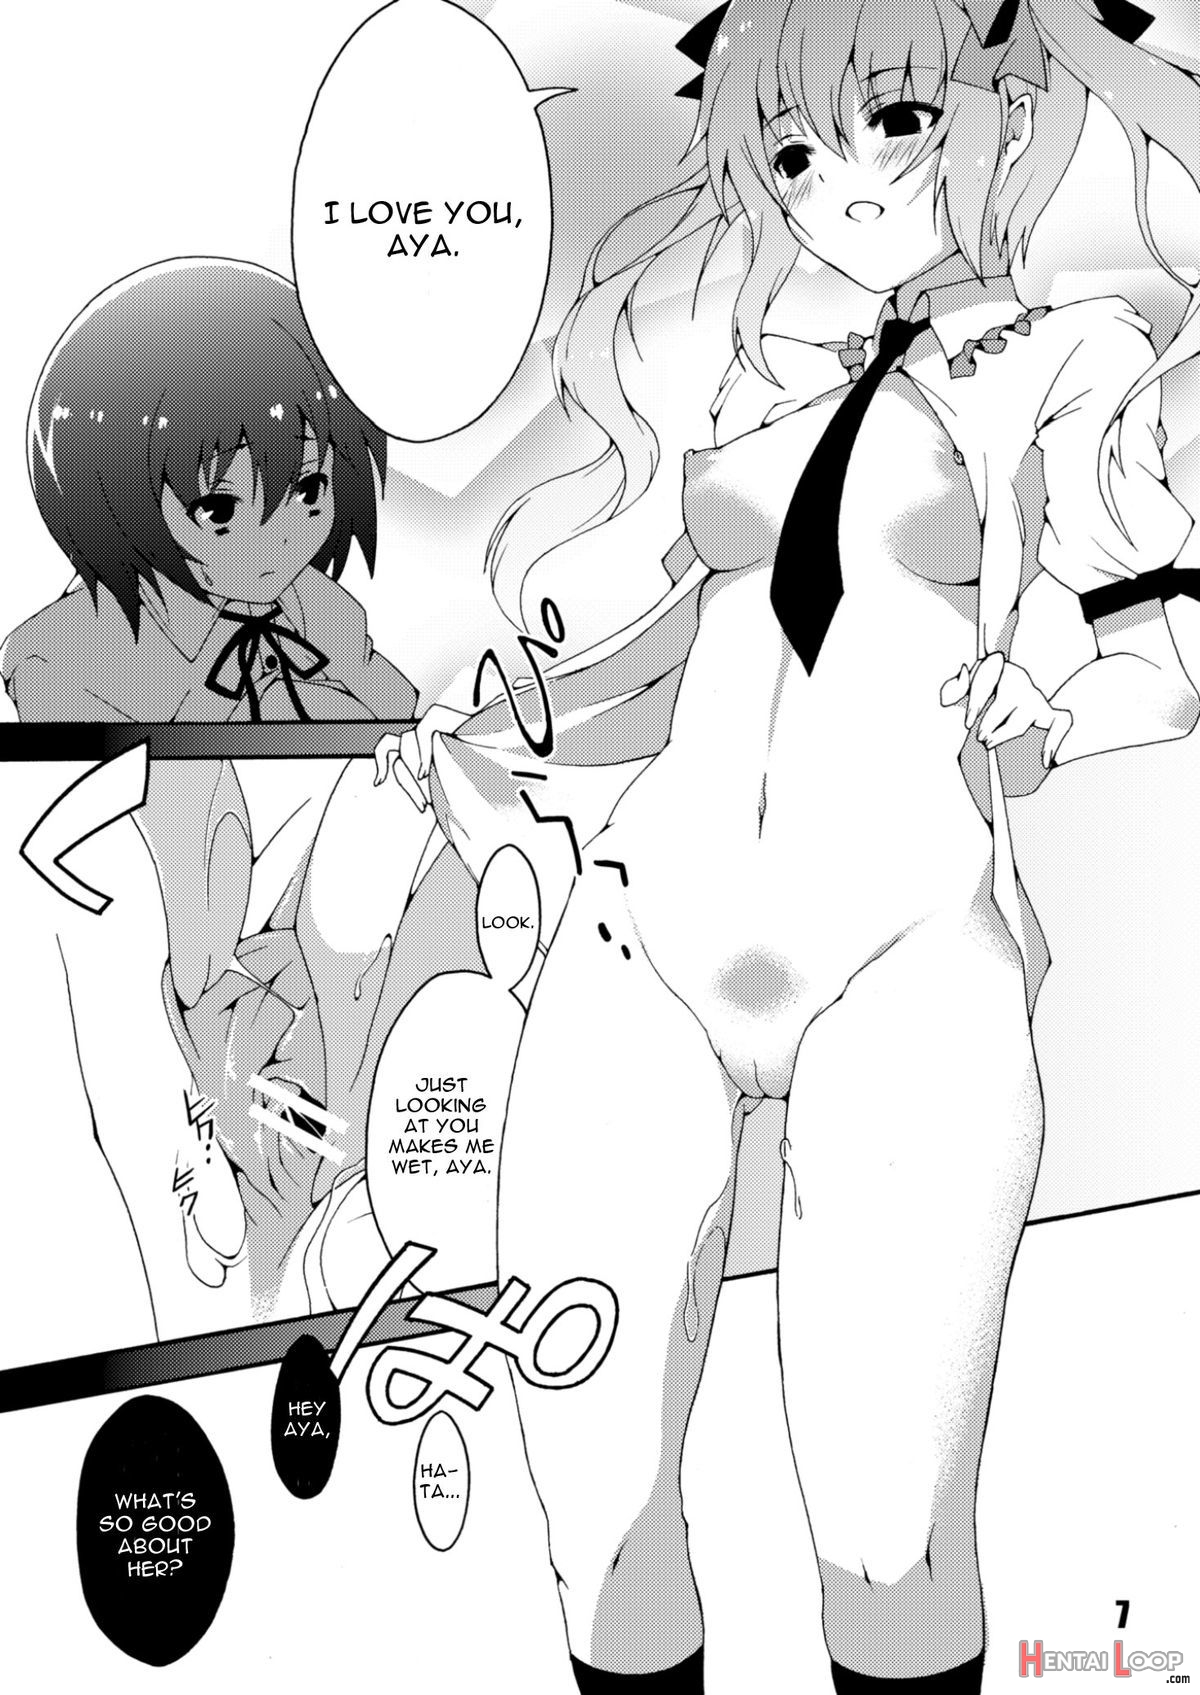 Kanojo No Ryuugi There Is No Such Thing As Light. page 7